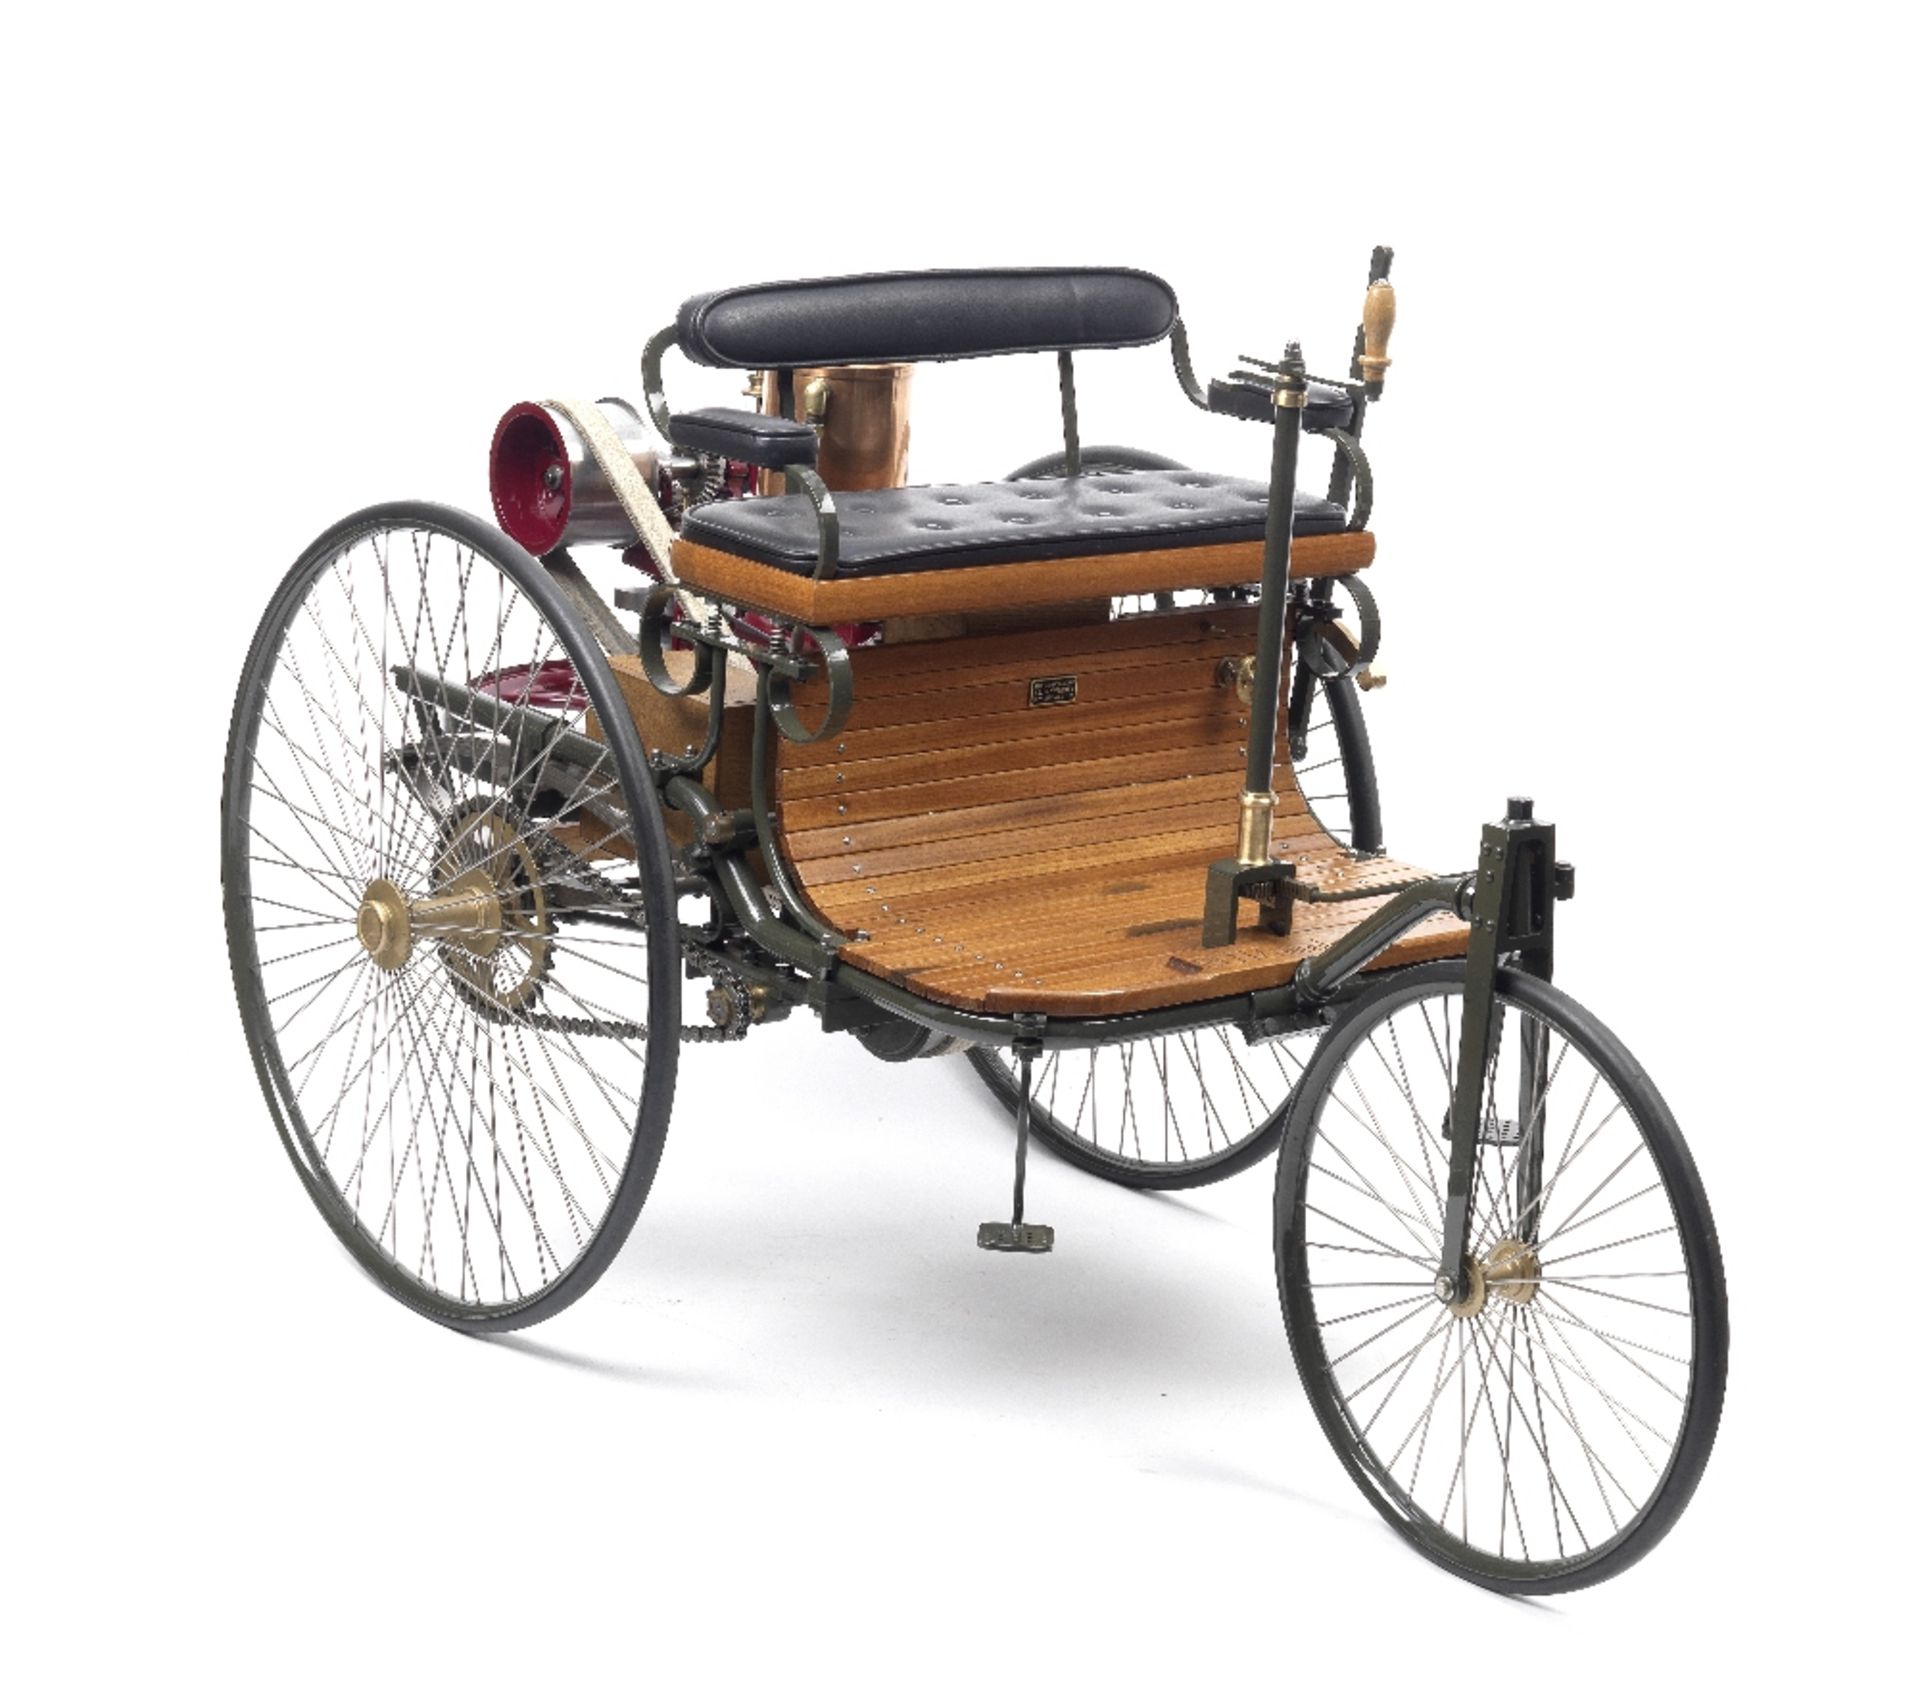 A superb half-scale petrol-powered working model of an 1886 Benz Patent-Motorwagen Tri-car, by A...